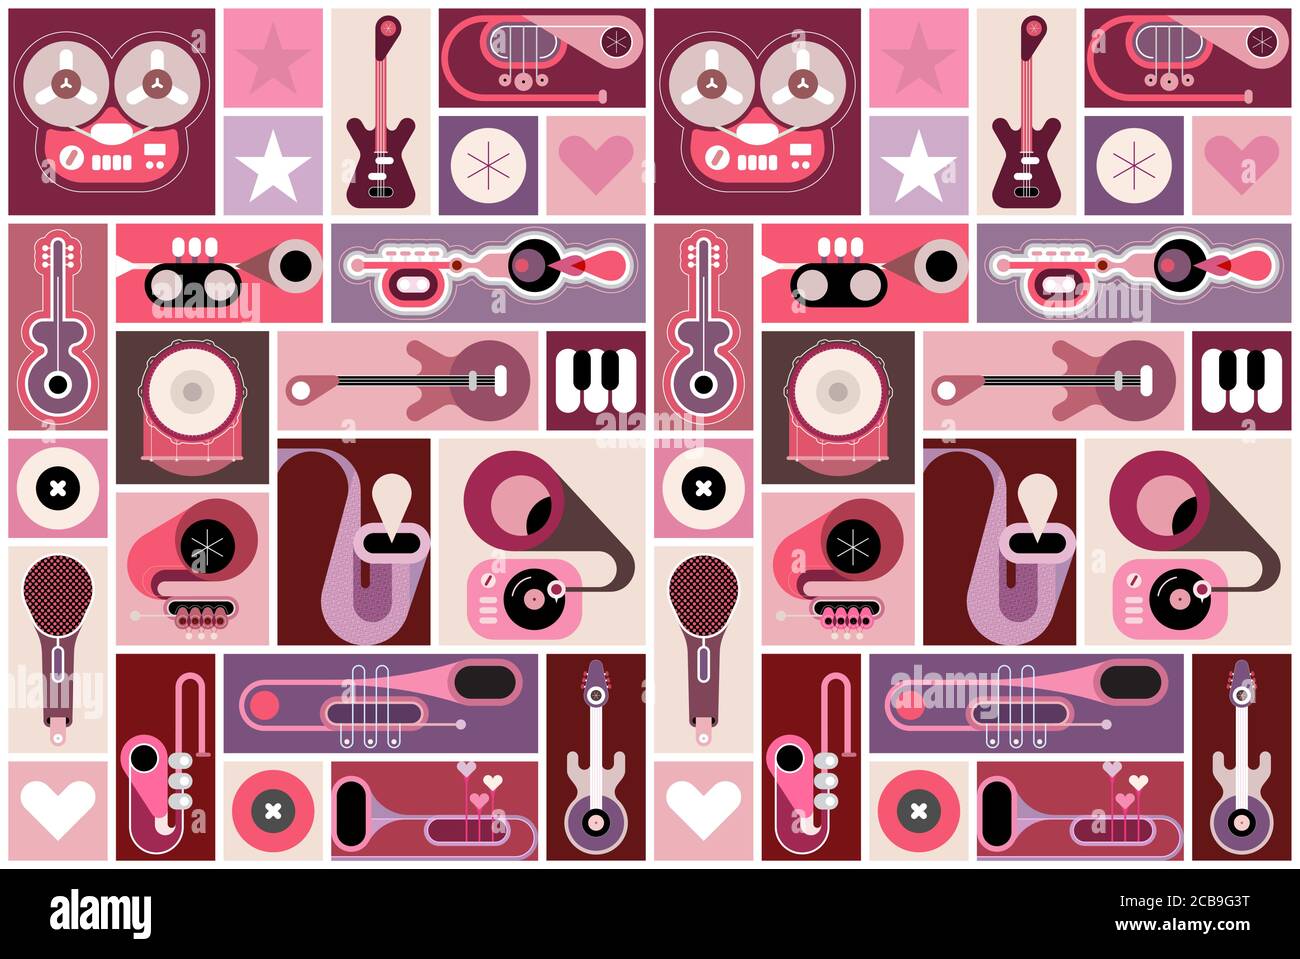 Music Instruments Collage Pop Art Vector Illustration Musical Poster Design With Many Different Elements Can Be Used As Seamless Background Stock Vector Image Art Alamy